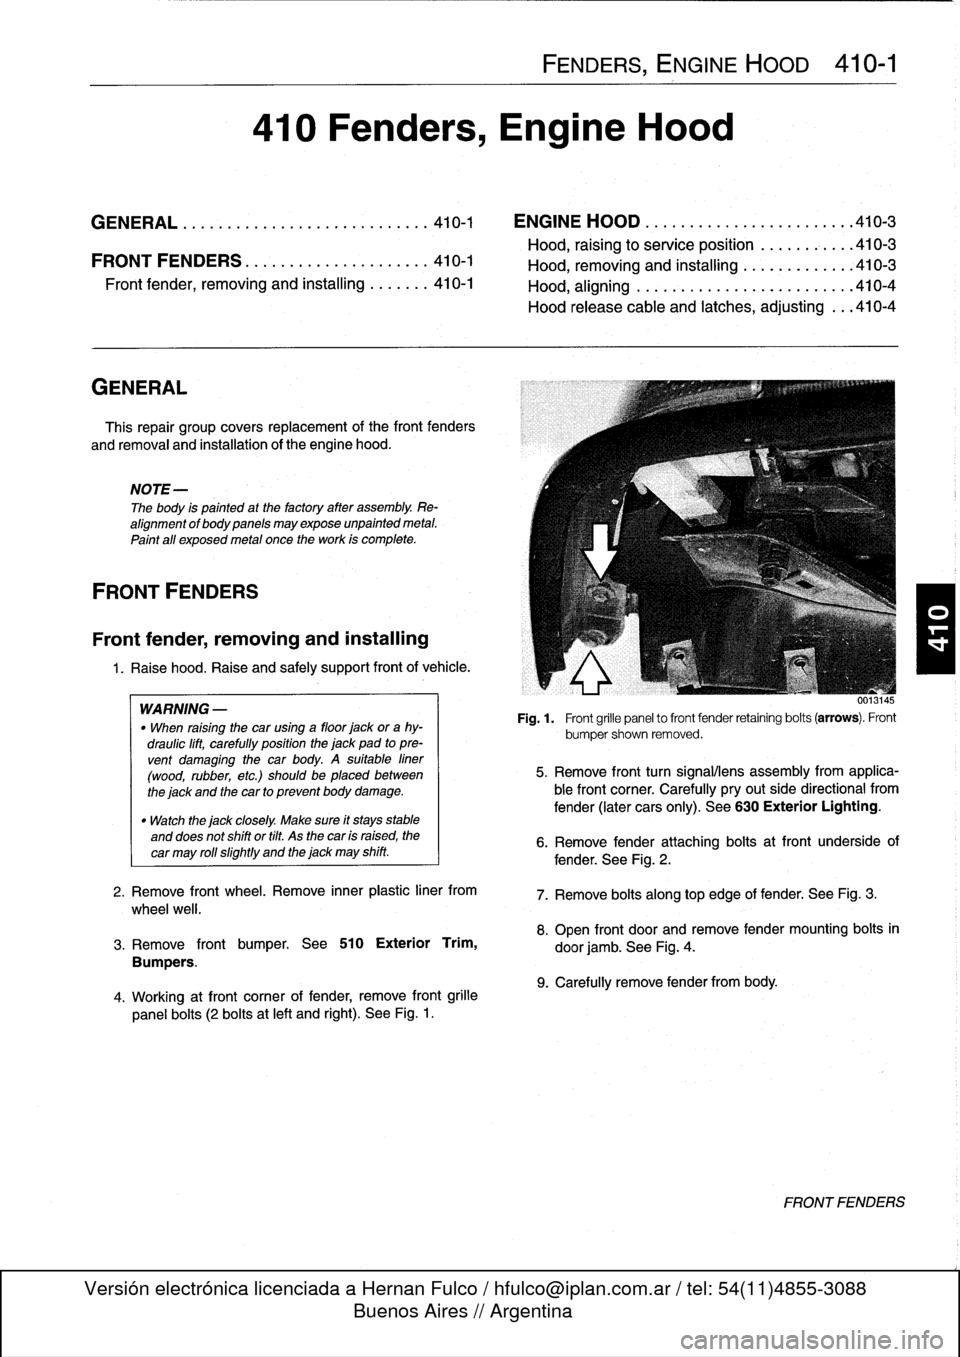 BMW 318i 1992 E36 Workshop Manual 
GENERAL

This
repair
group
covers
replacement
of
the
front
fenders

and
removal
and
installation
of
the
engine
hood
.

NOTE-

The
body
is
painted
at
the
factoryafter
assembly
.
Re-
alignment
of
body
